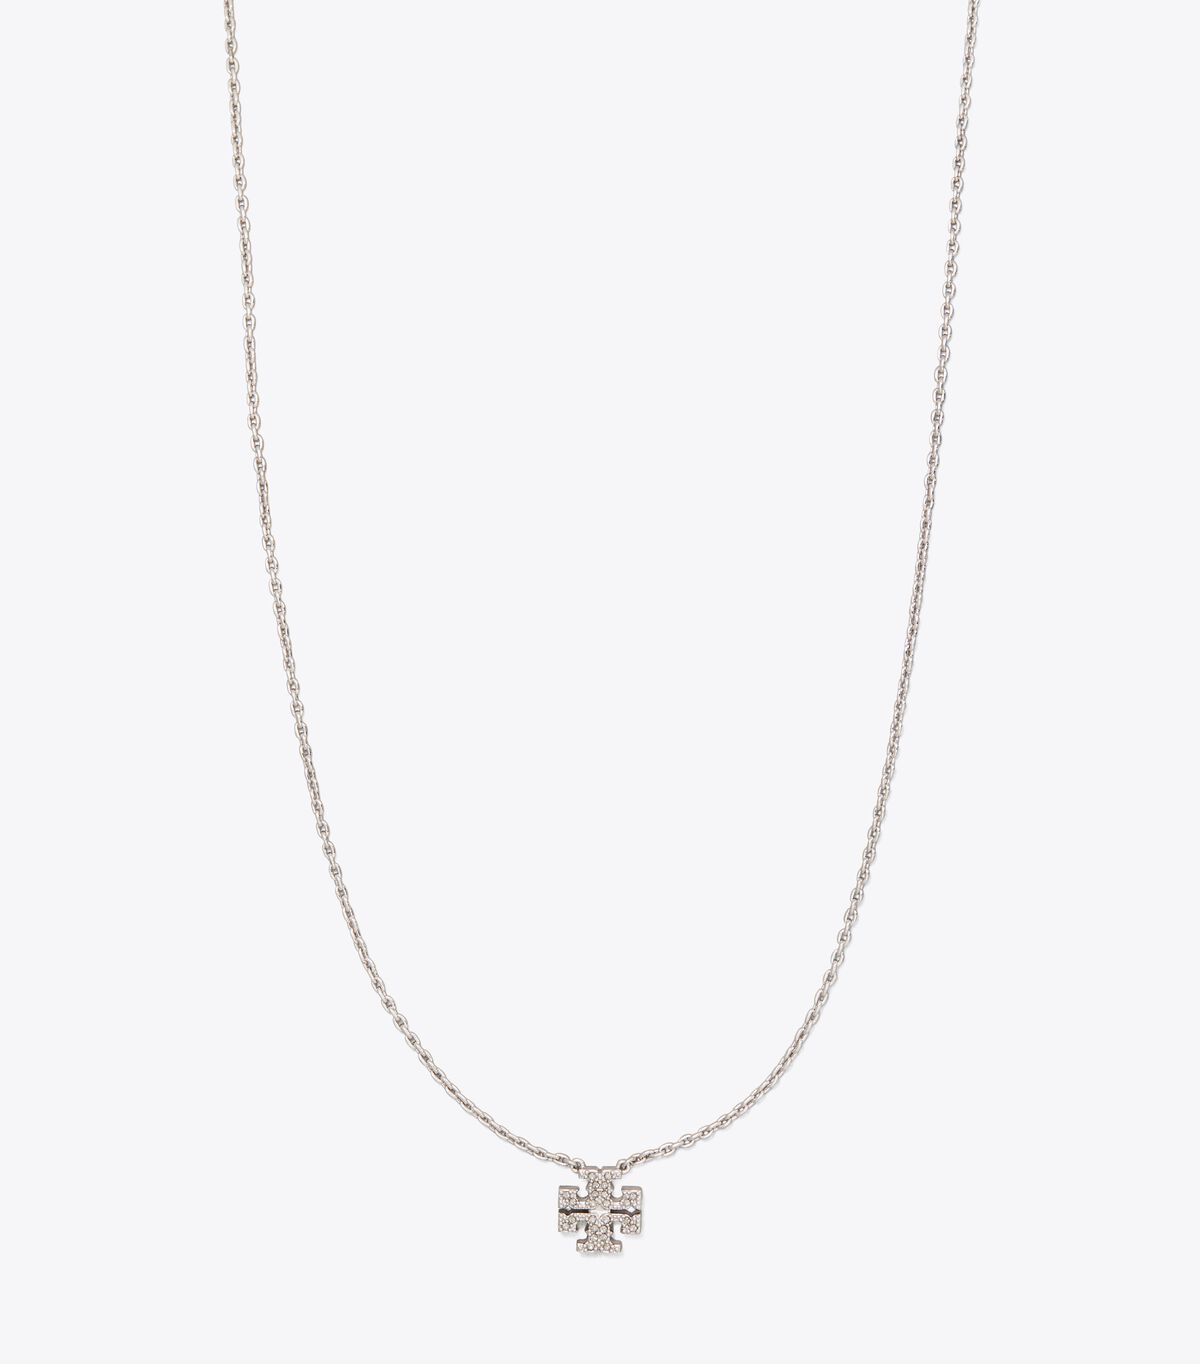 Kira Pave Delicate Necklace